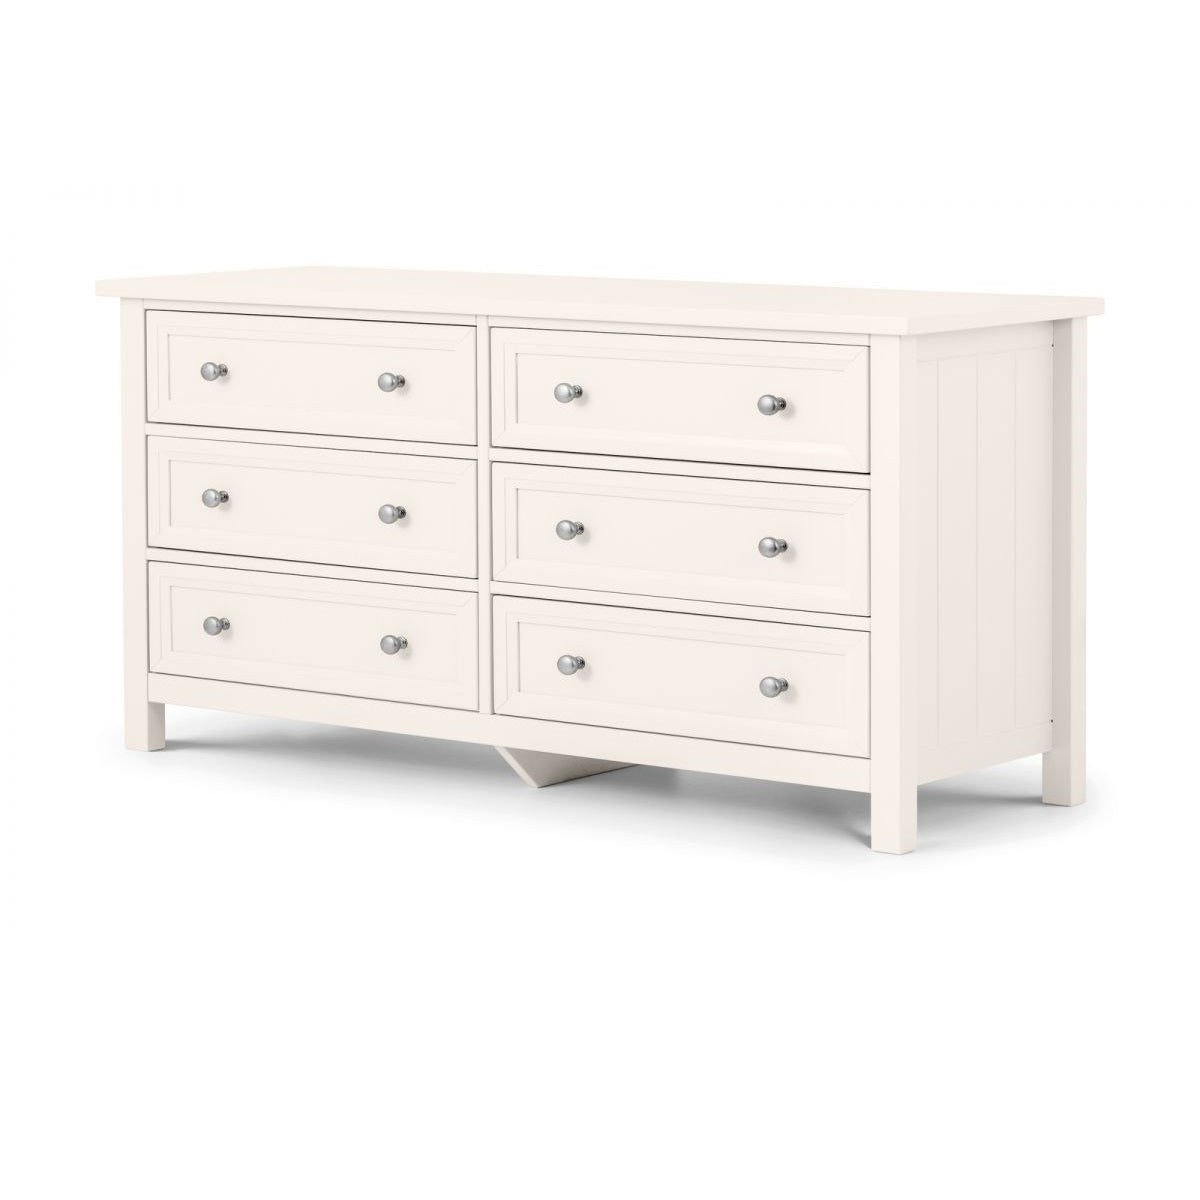 6 Drawer Chest of Drawers